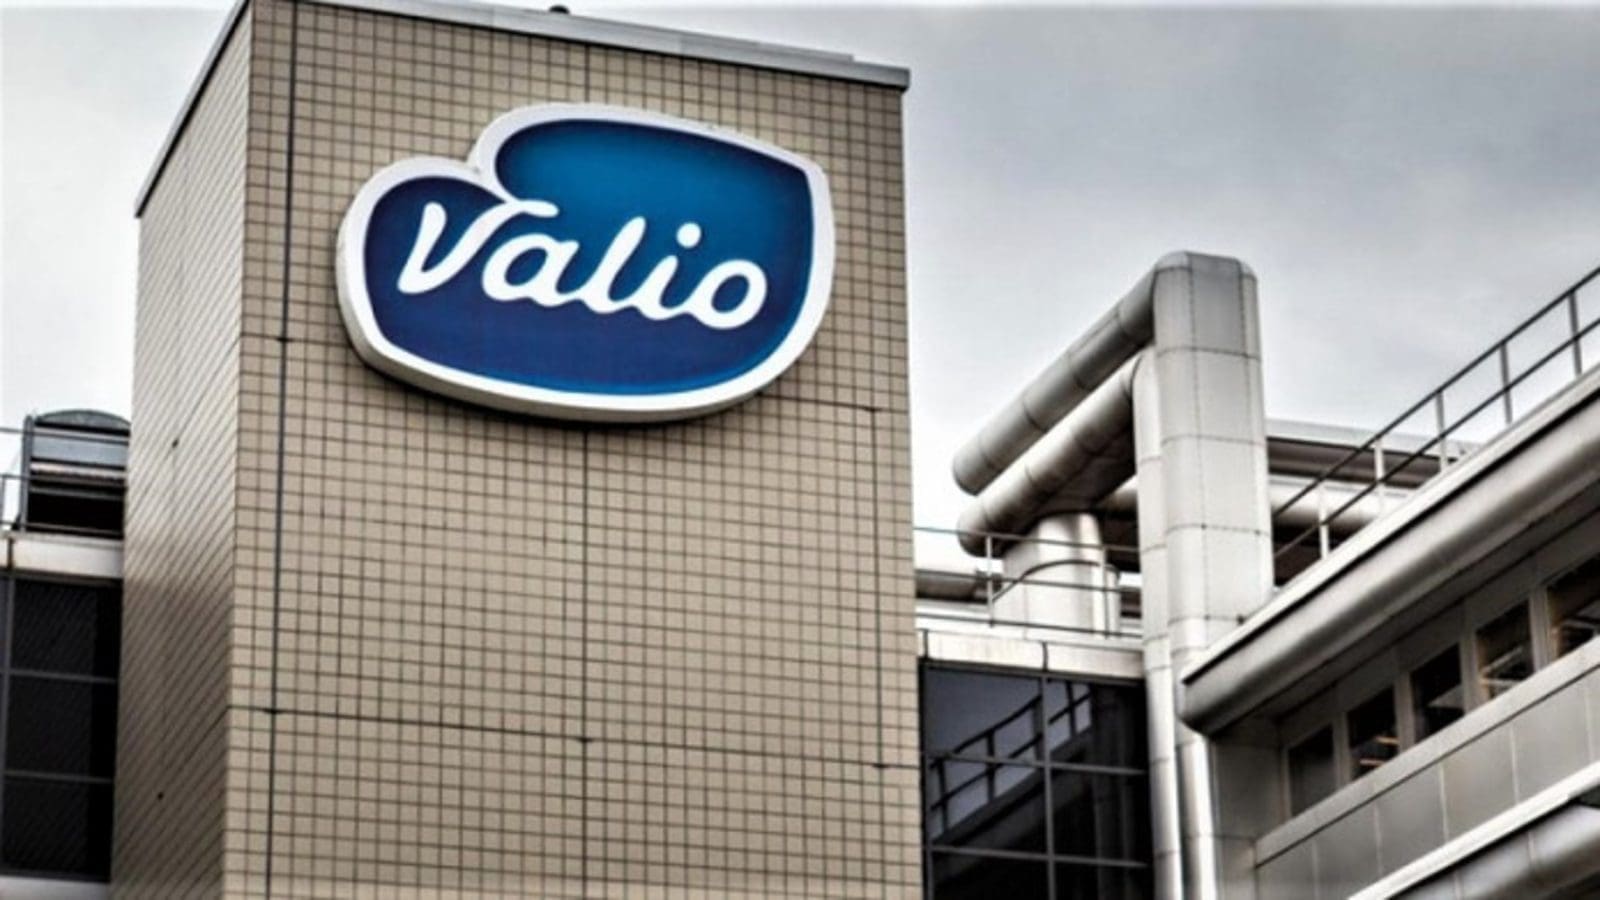 Valio starts phasing out natural gas usage amid shortages in gas supply, launches chocolate of the future